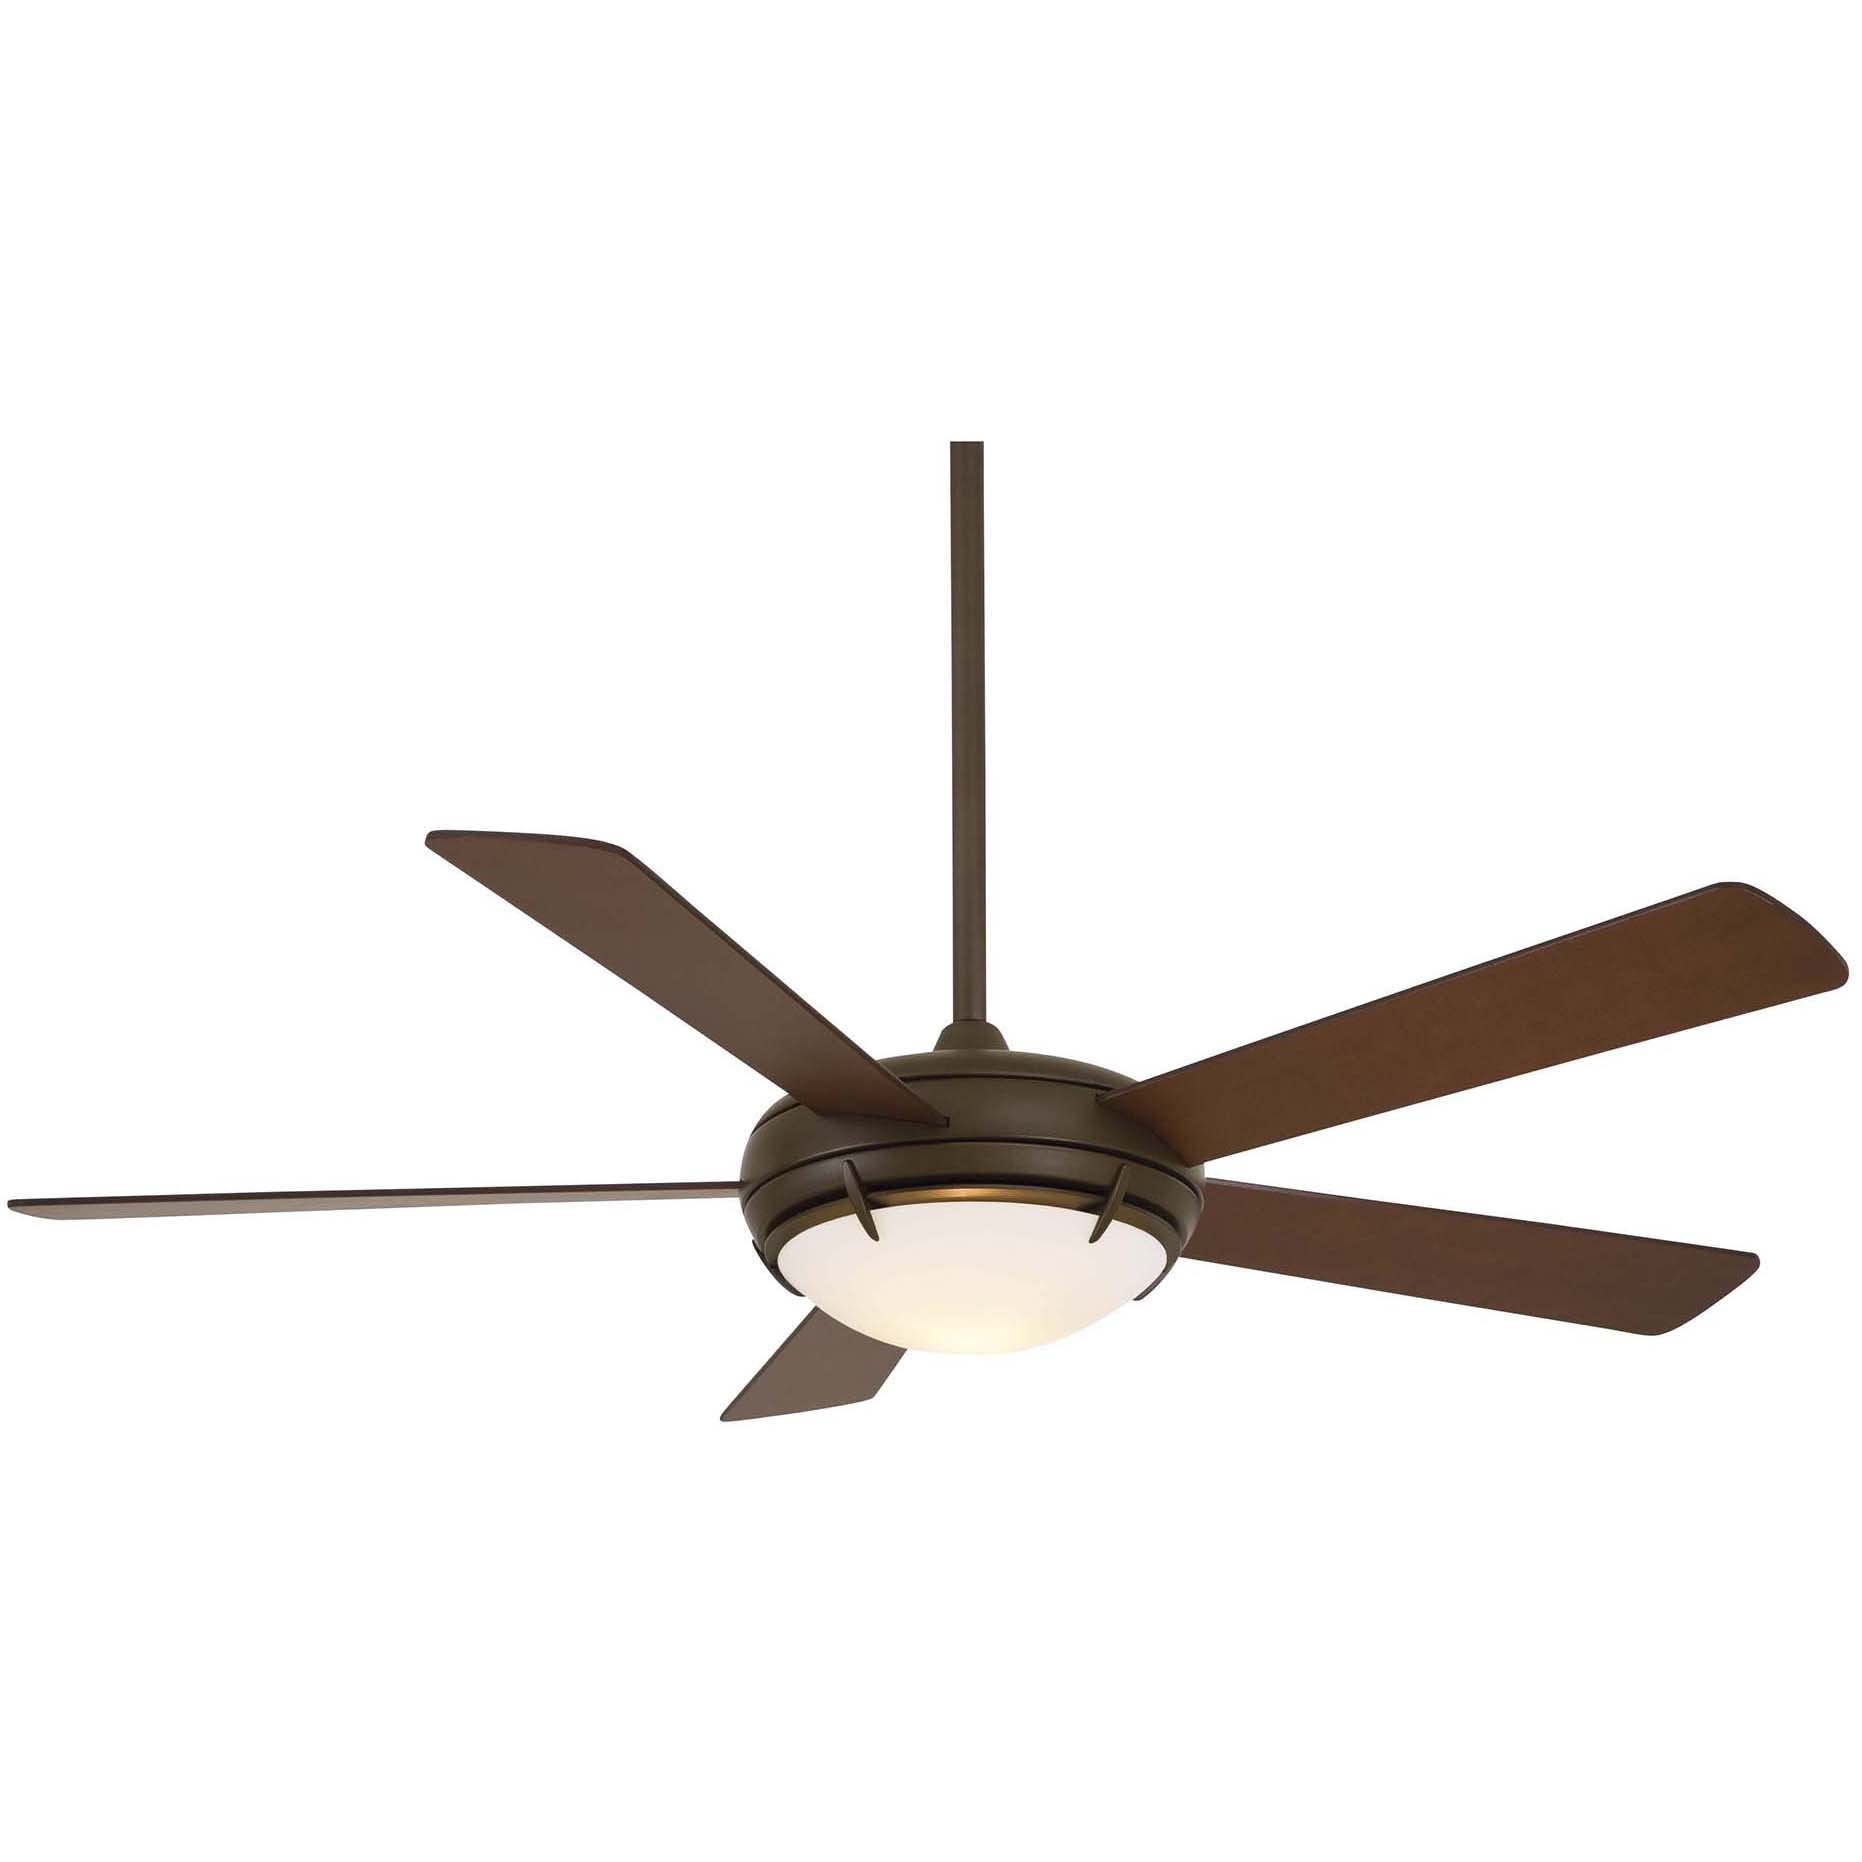 Minka Aire 54 Como 5 Blade Contemporary Ceiling Fan With Remote within measurements 1862 X 1862